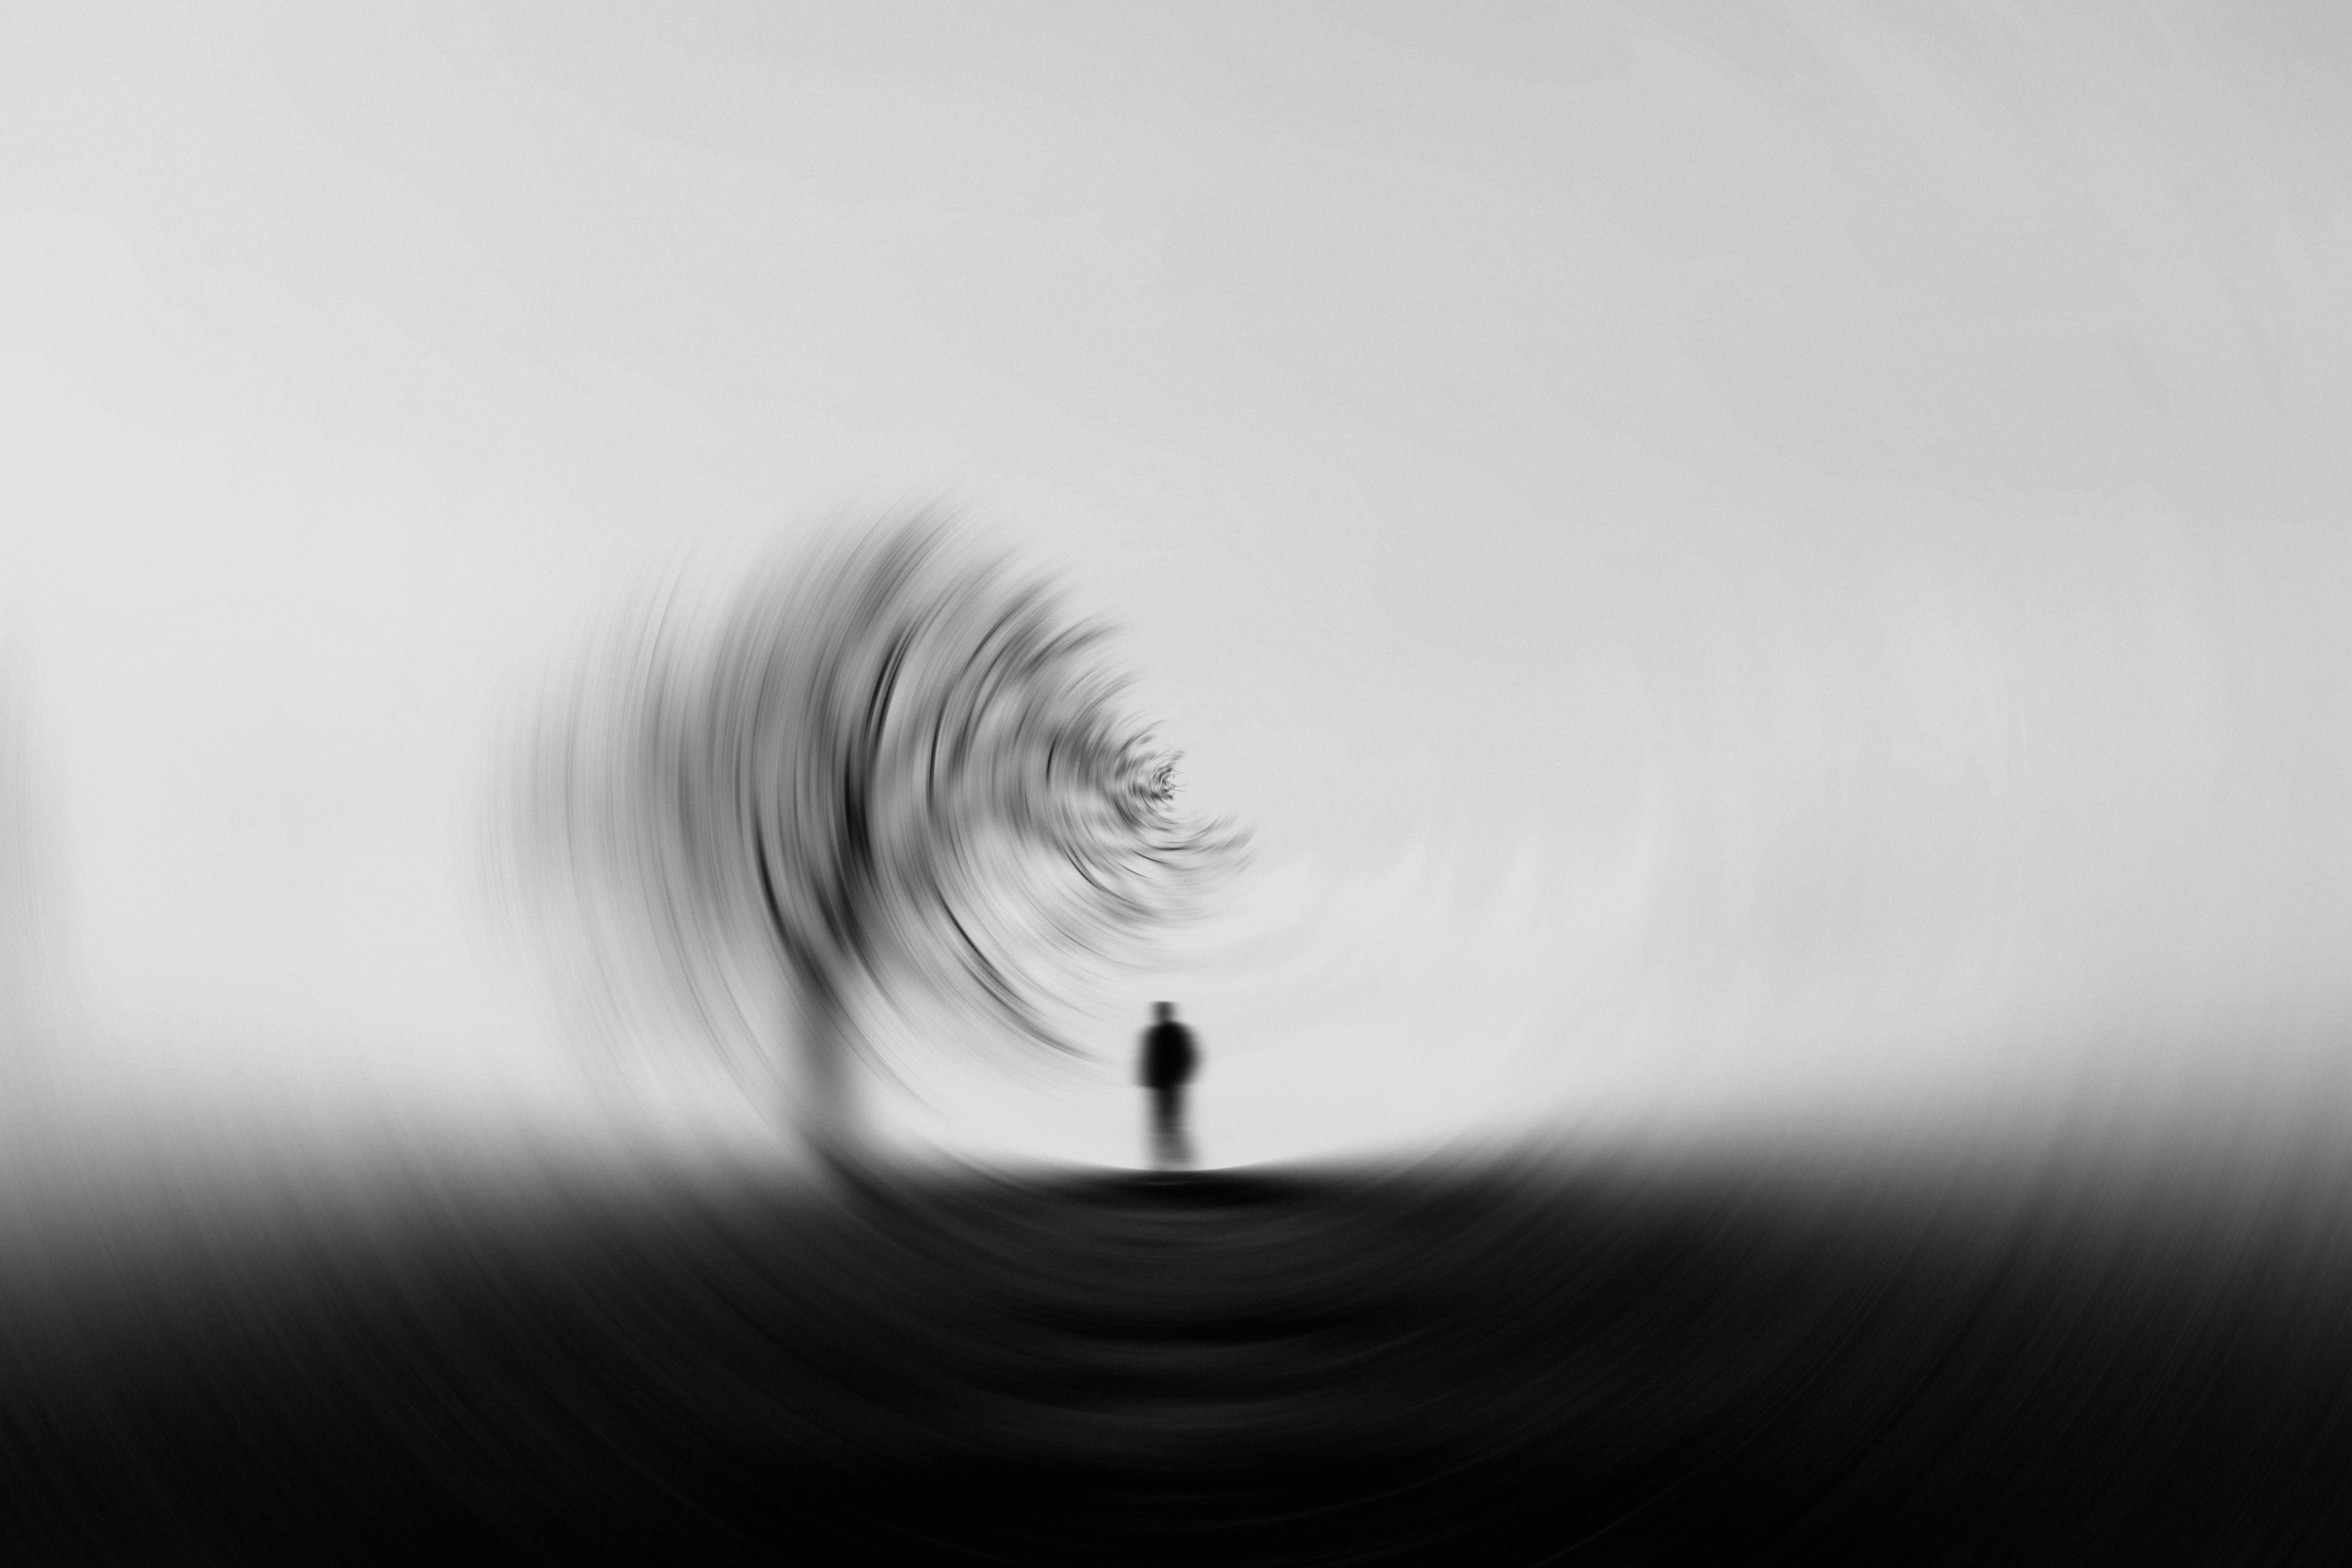 chb, effect, bw, silhouette, smooth, blur, miscellanea, miscellaneous, wood, tree